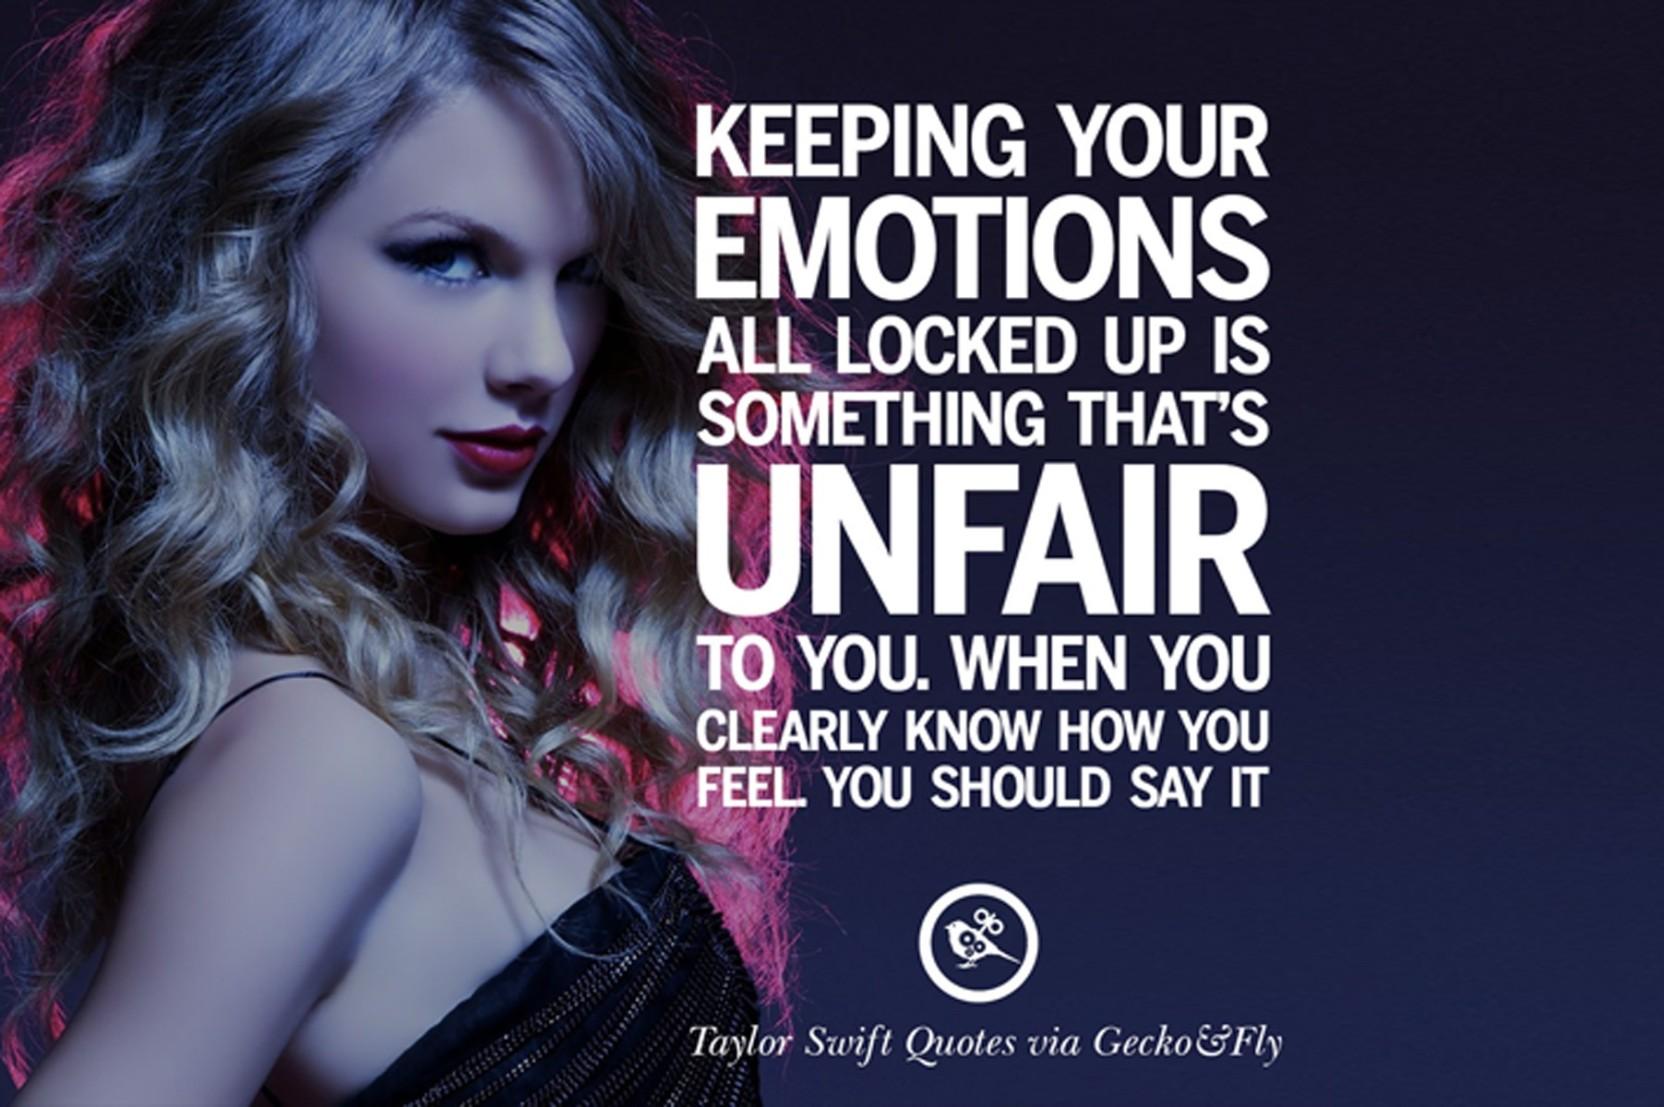 Taylor Swift Quotes Poster (Size 12 Inch x 18 Inch) (Pack